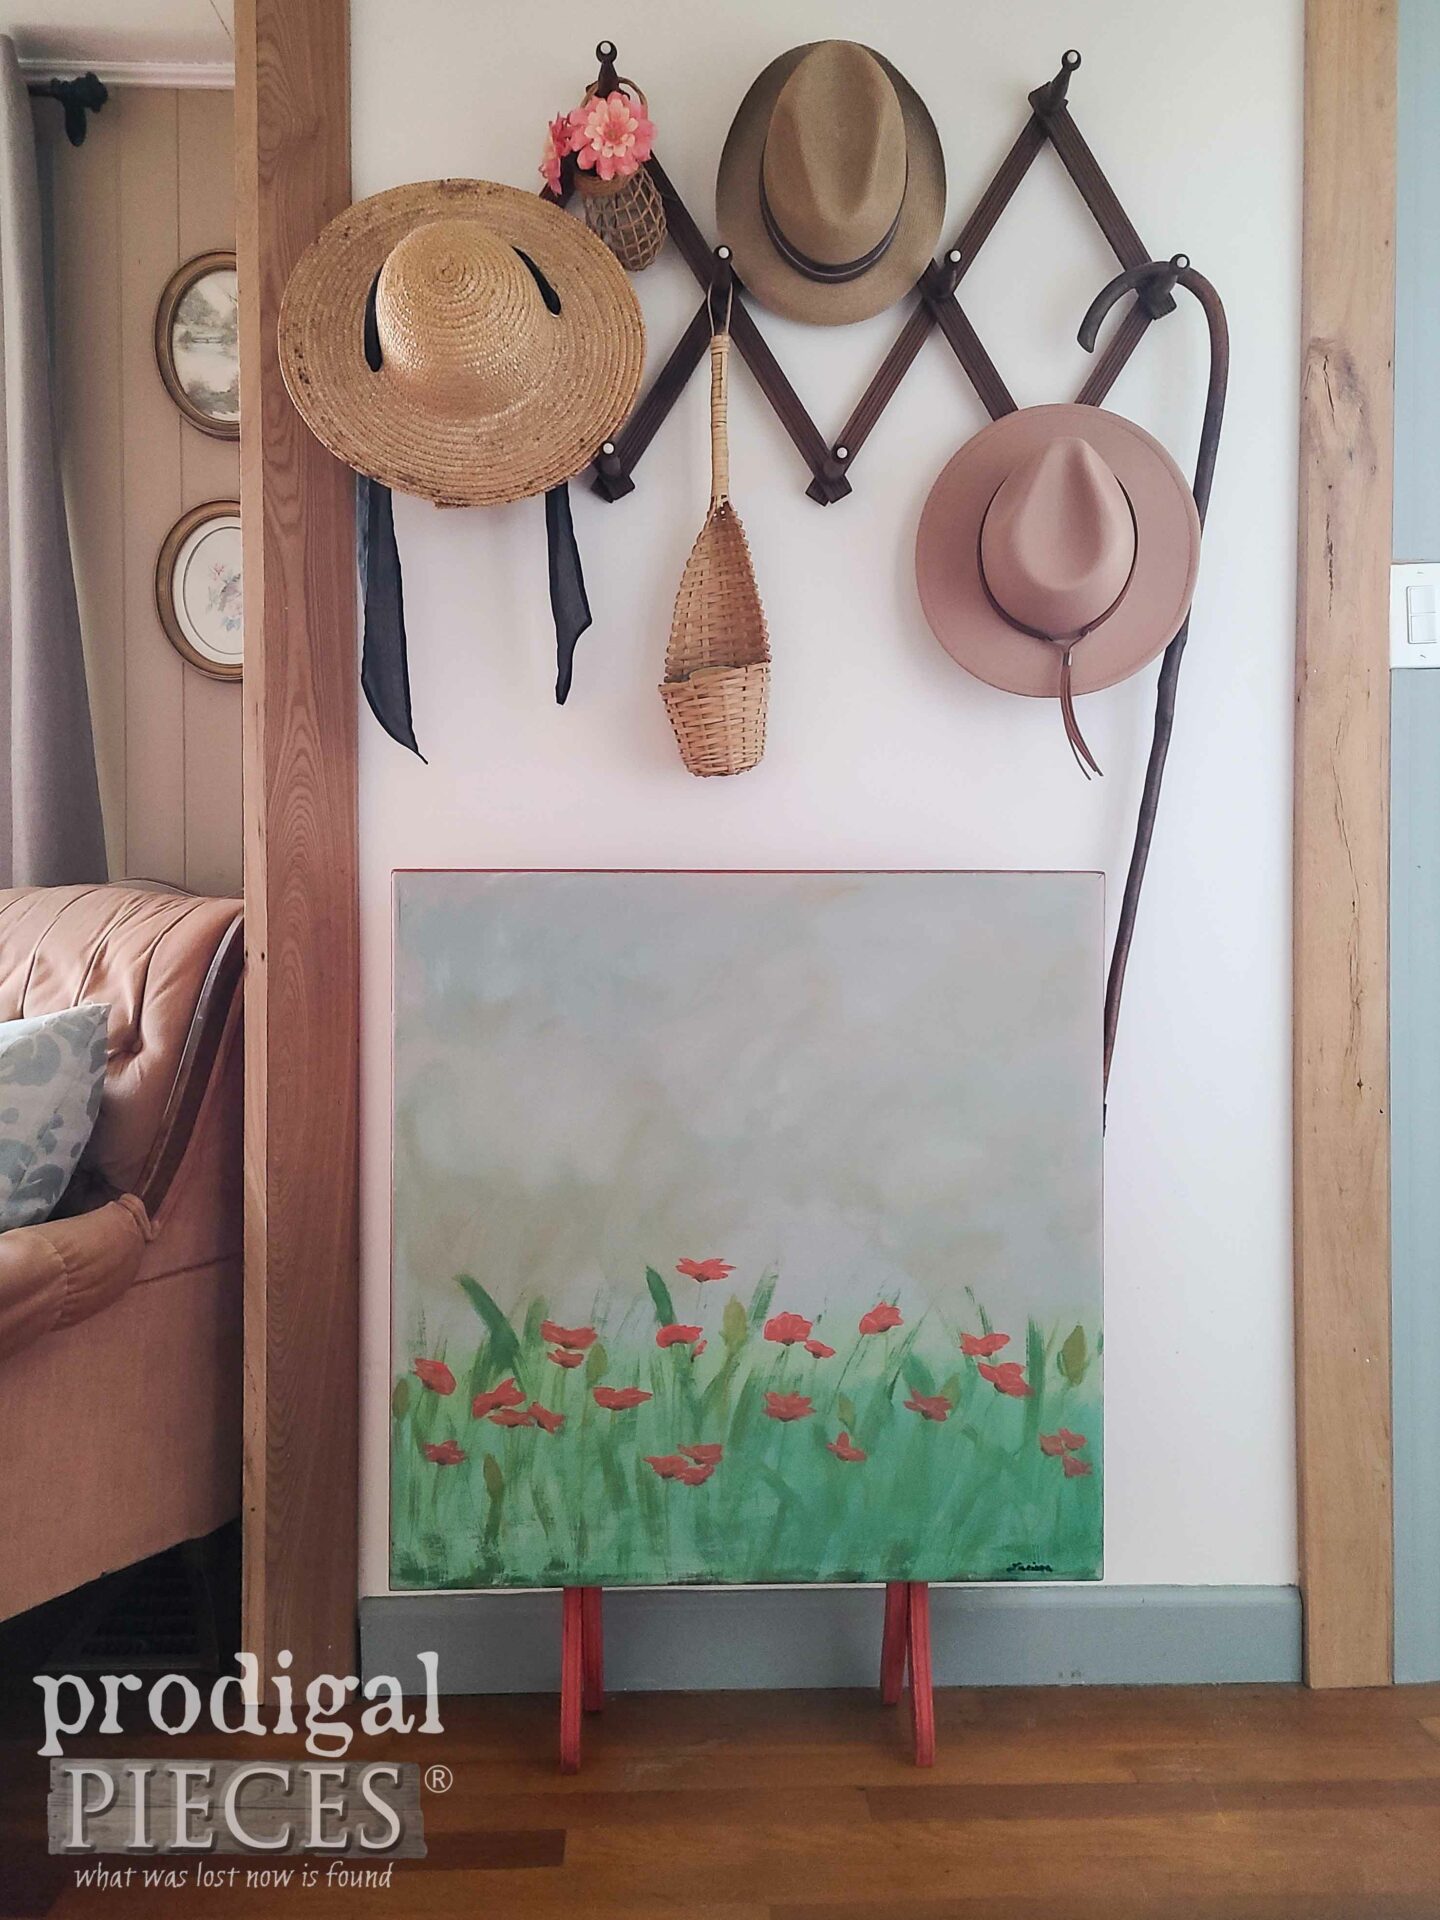 Handpainted Antique Tilt Top Table with Poppy Flower Painting by Larissa of Prodigal Pieces | prodigalpieces.com #prodigalpieces #diy #furniture #makeover